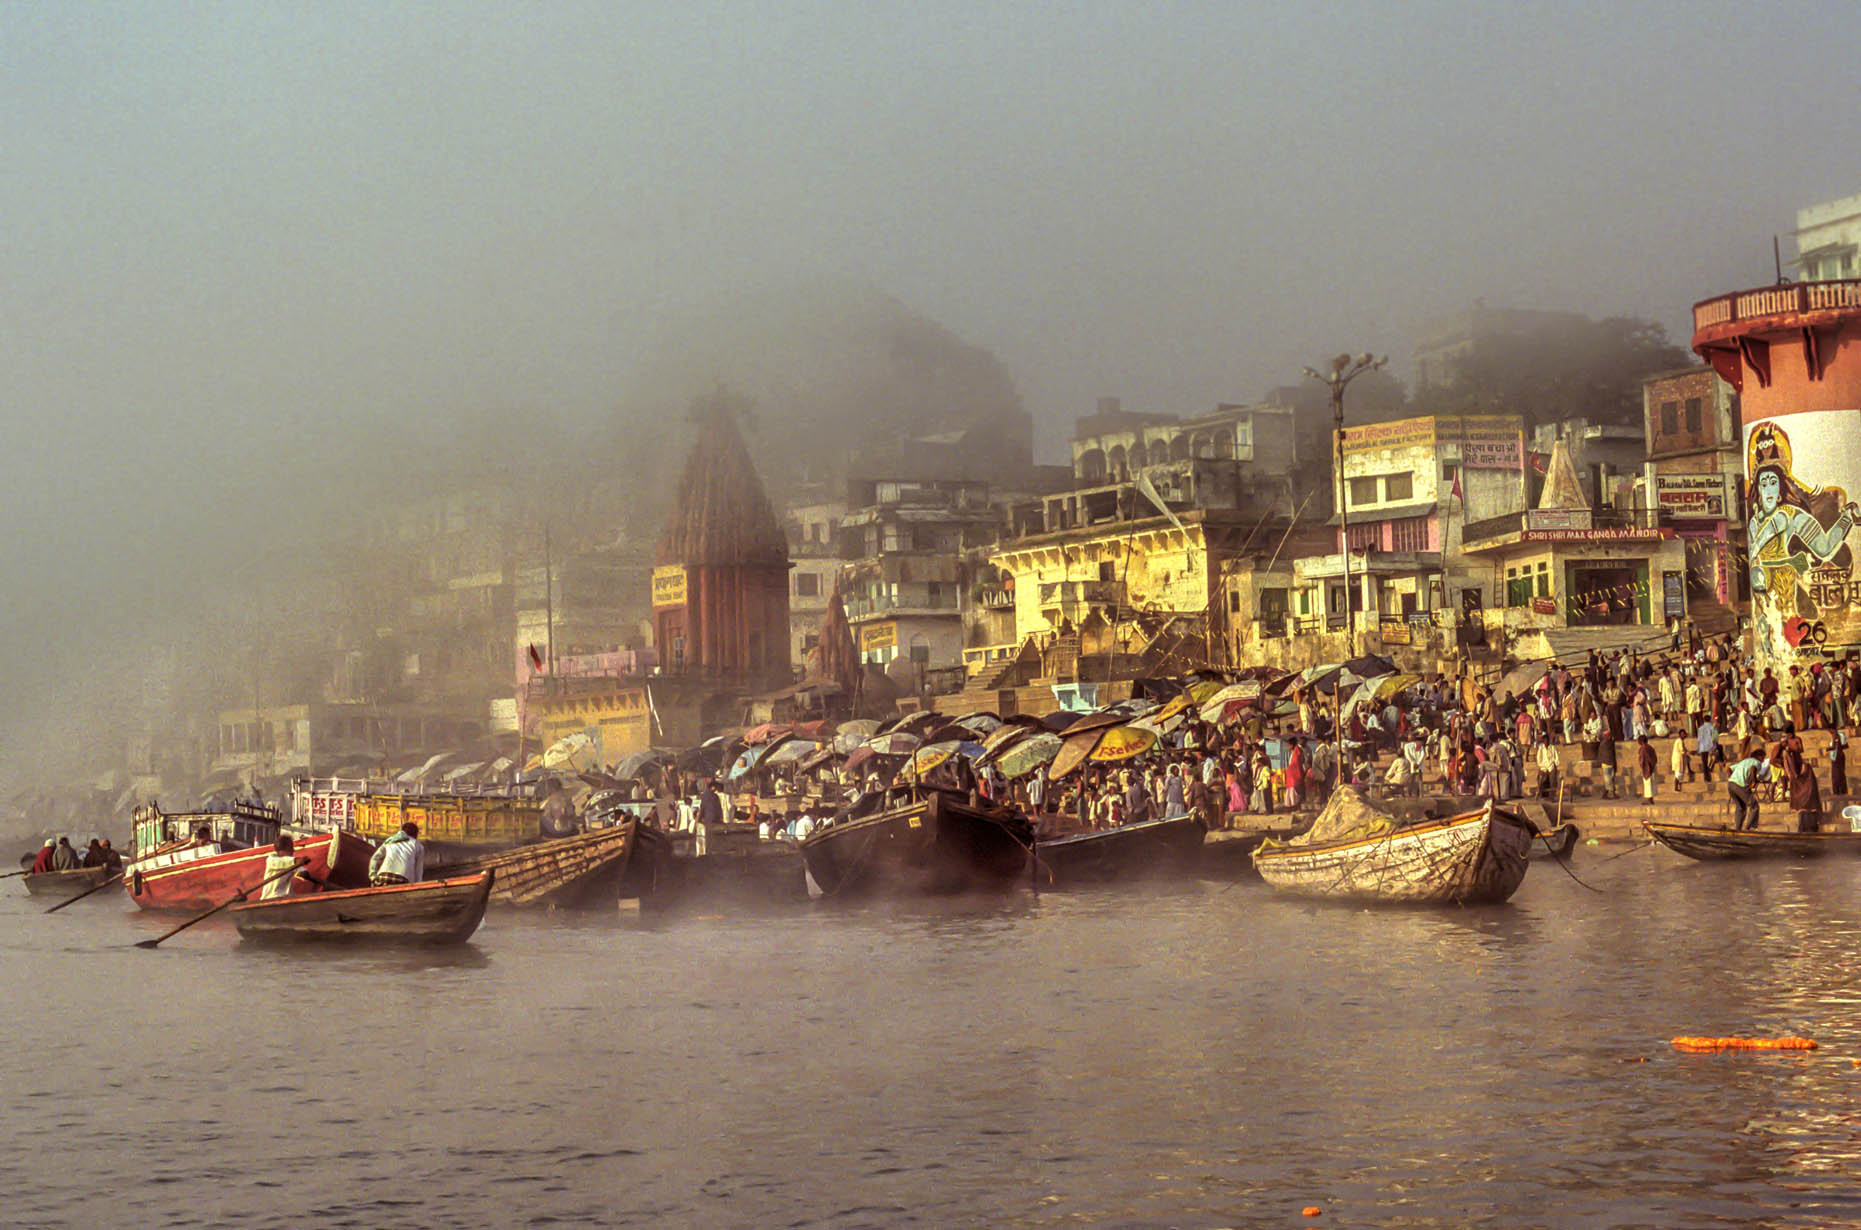 Early morning on the Ganges.